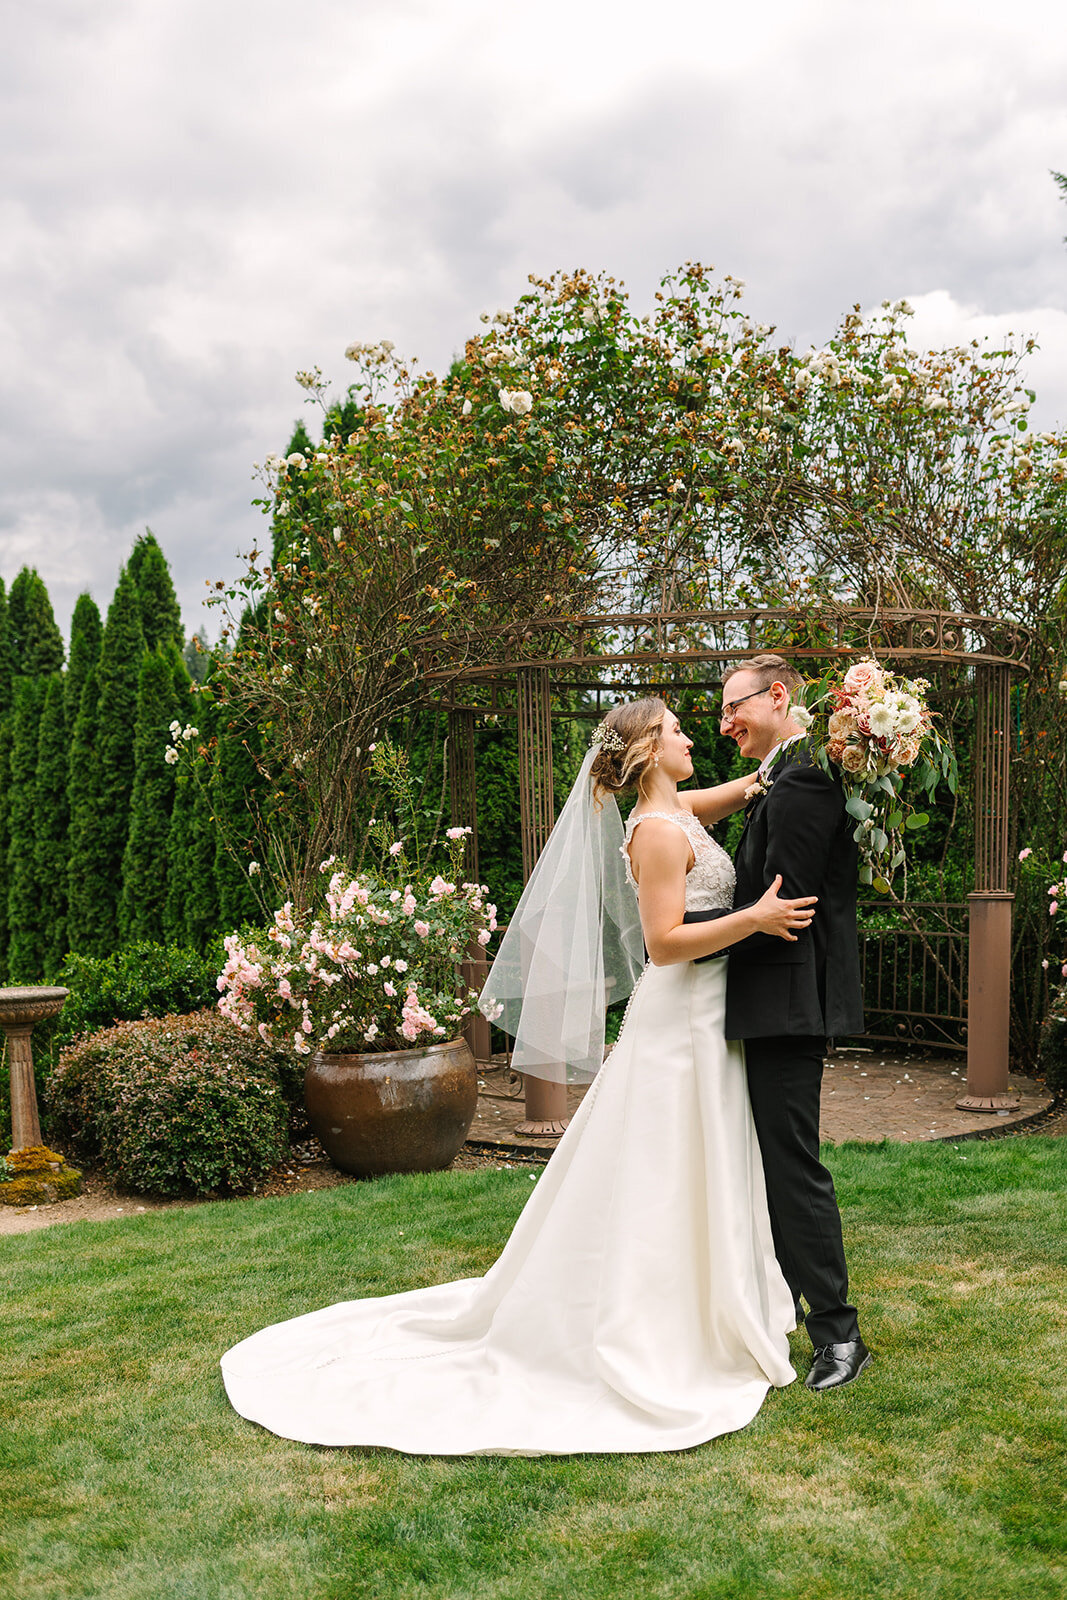 Photos of the bride and groom at Snohomish Wedding Venue Greengates at Flowing Lake